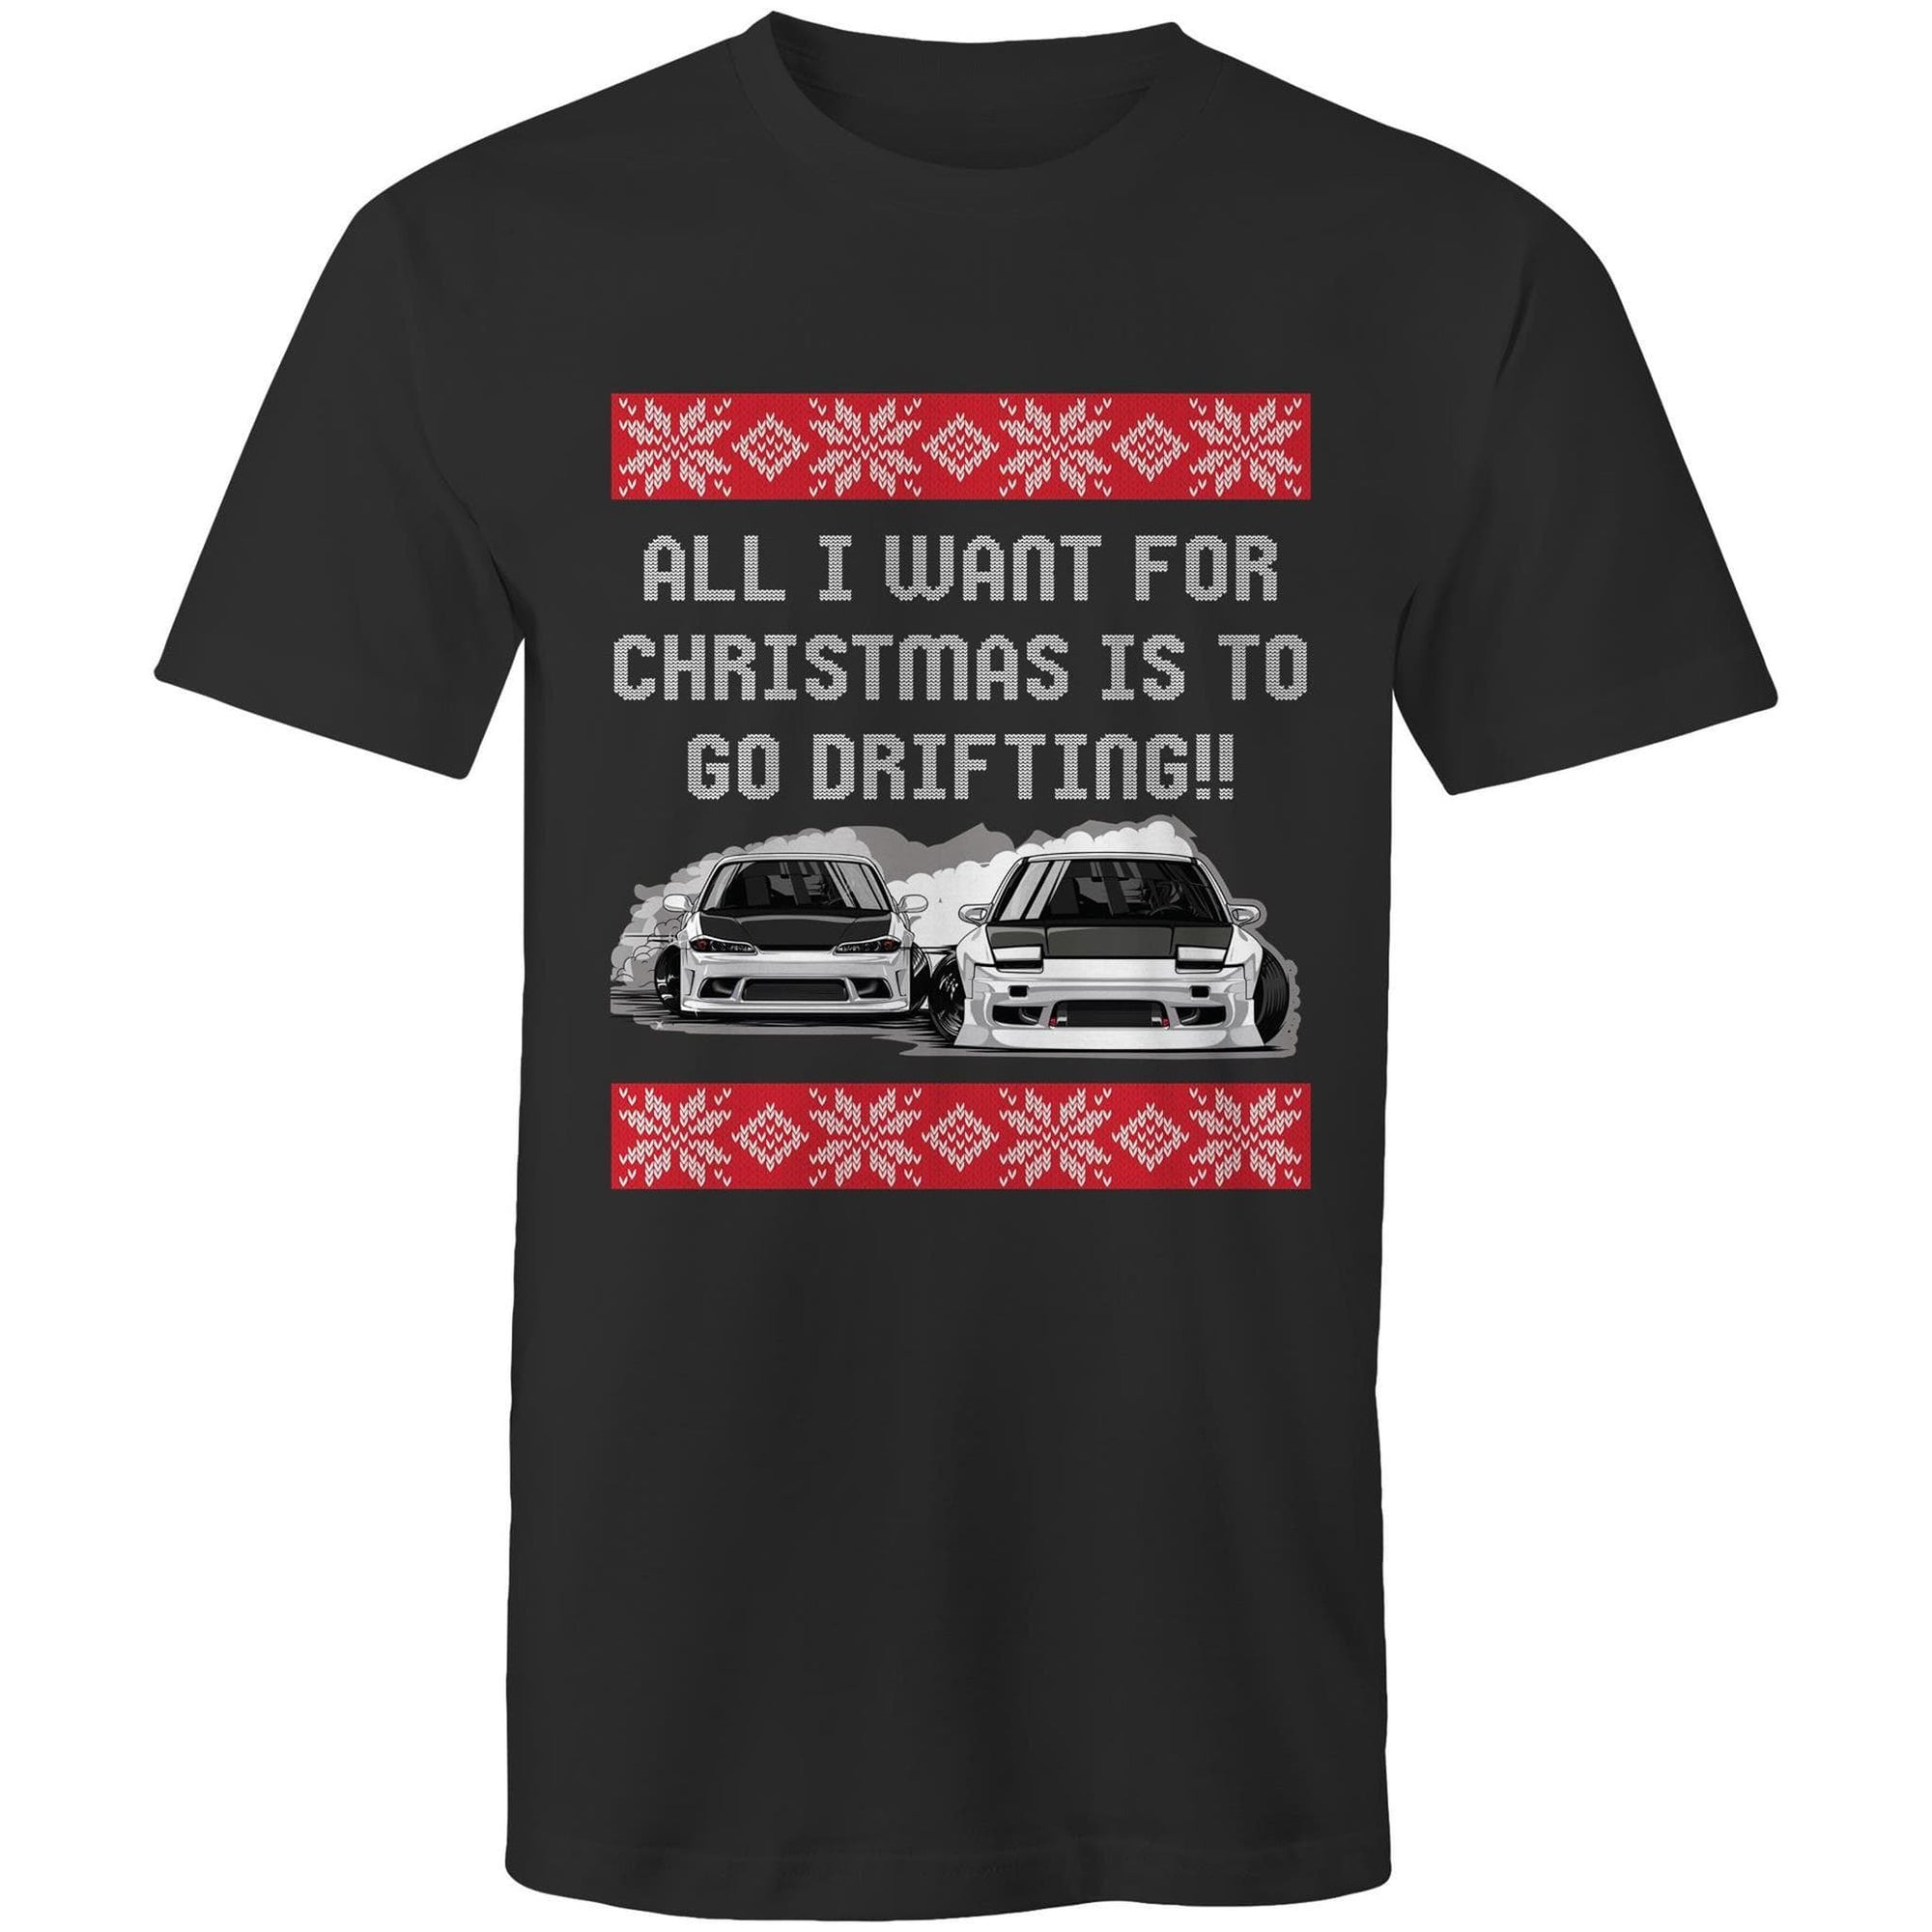 I Love Drift Clothing All I Want For Christmas Is To Go Drifting T-Shirt